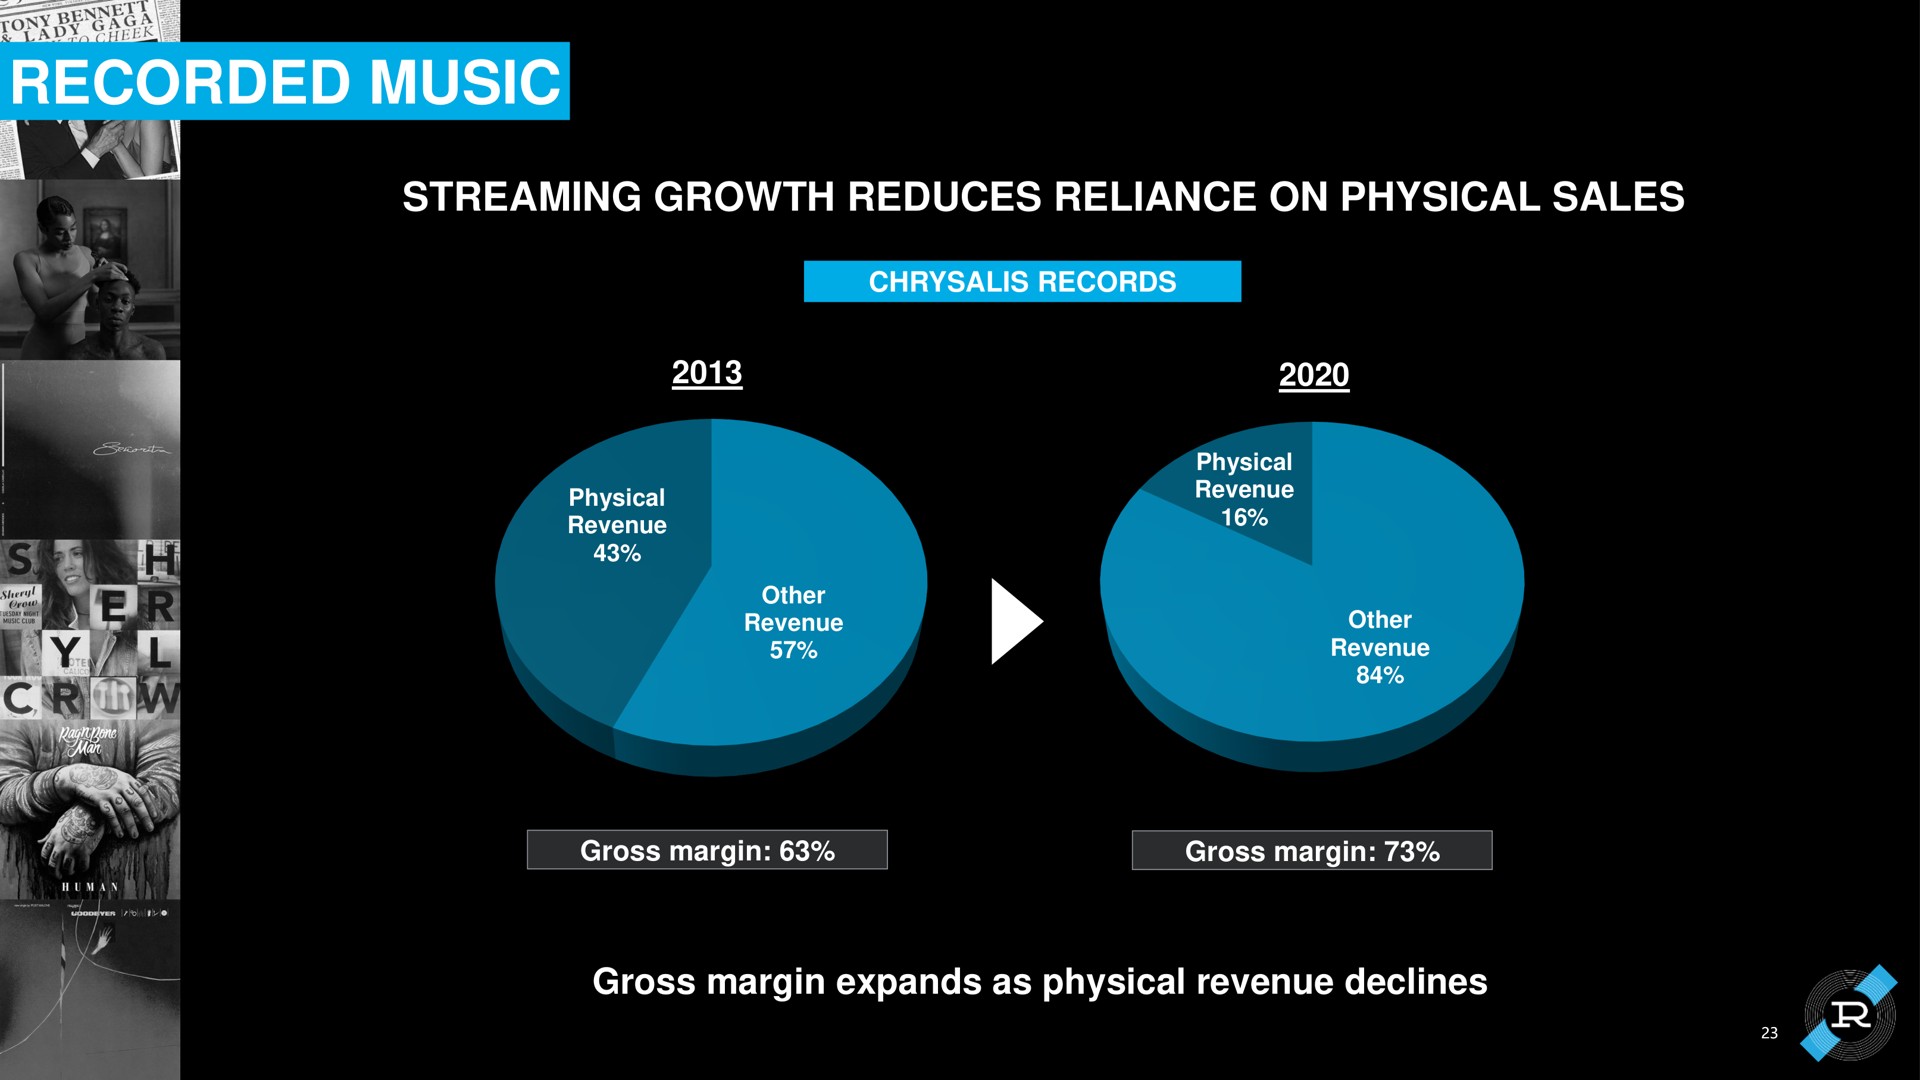 recorded music streaming growth reduces reliance on physical sales gross margin expands as revenue declines | Reservoir